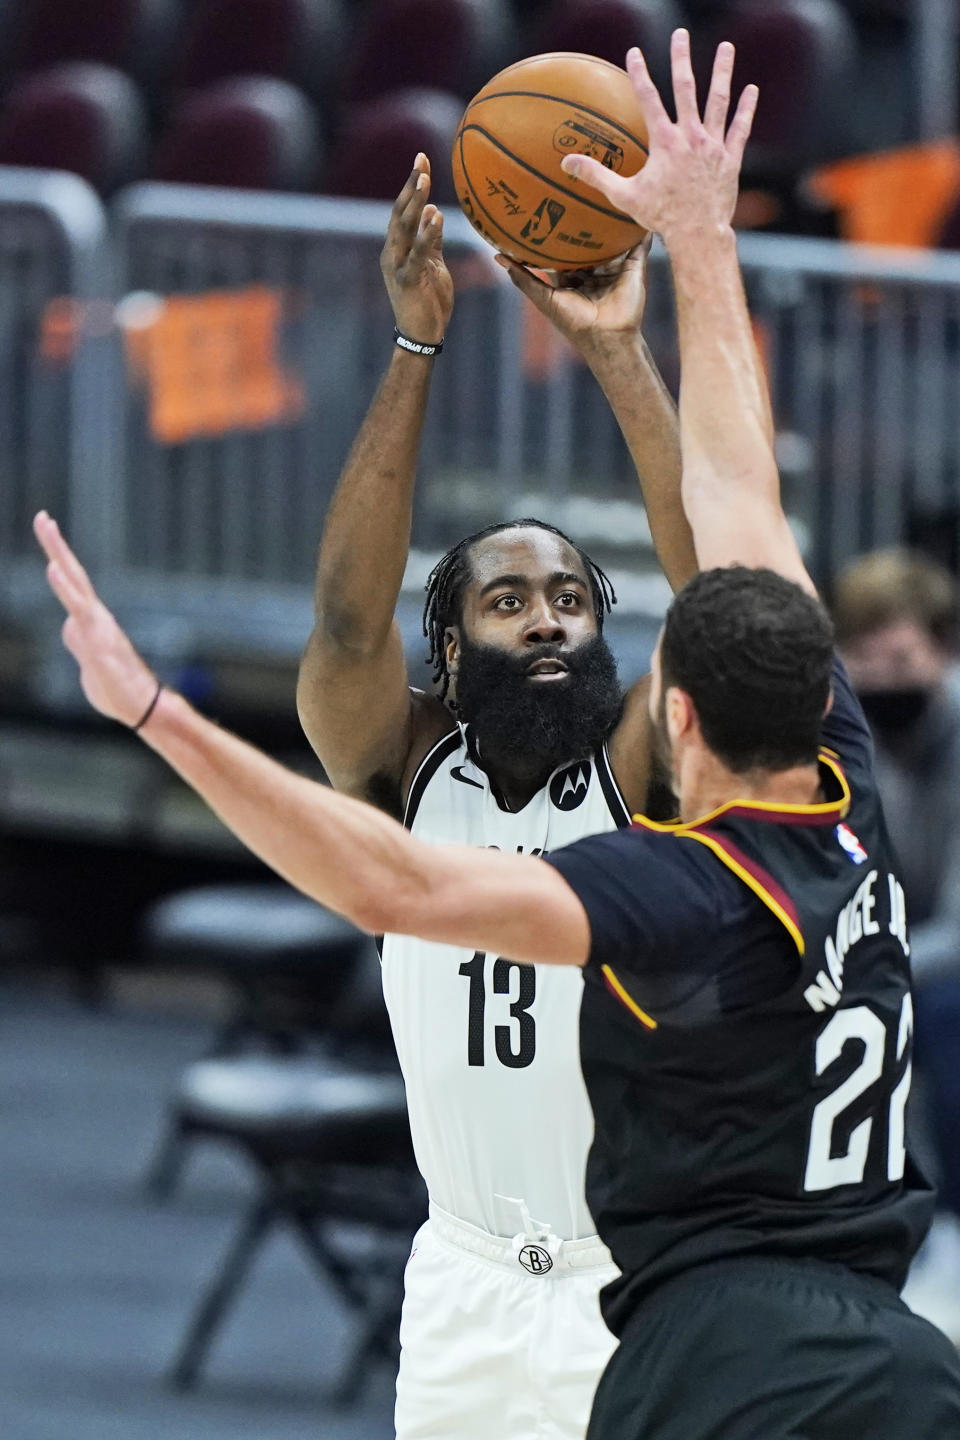 Brooklyn Nets' James Harden (13) shoots over Cleveland Cavaliers' Larry Nance Jr. (22) during the second half of an NBA basketball game, Wednesday, Jan. 20, 2021, in Cleveland. The Cavaliers won 147-135 in double-overtime. (AP Photo/Tony Dejak)